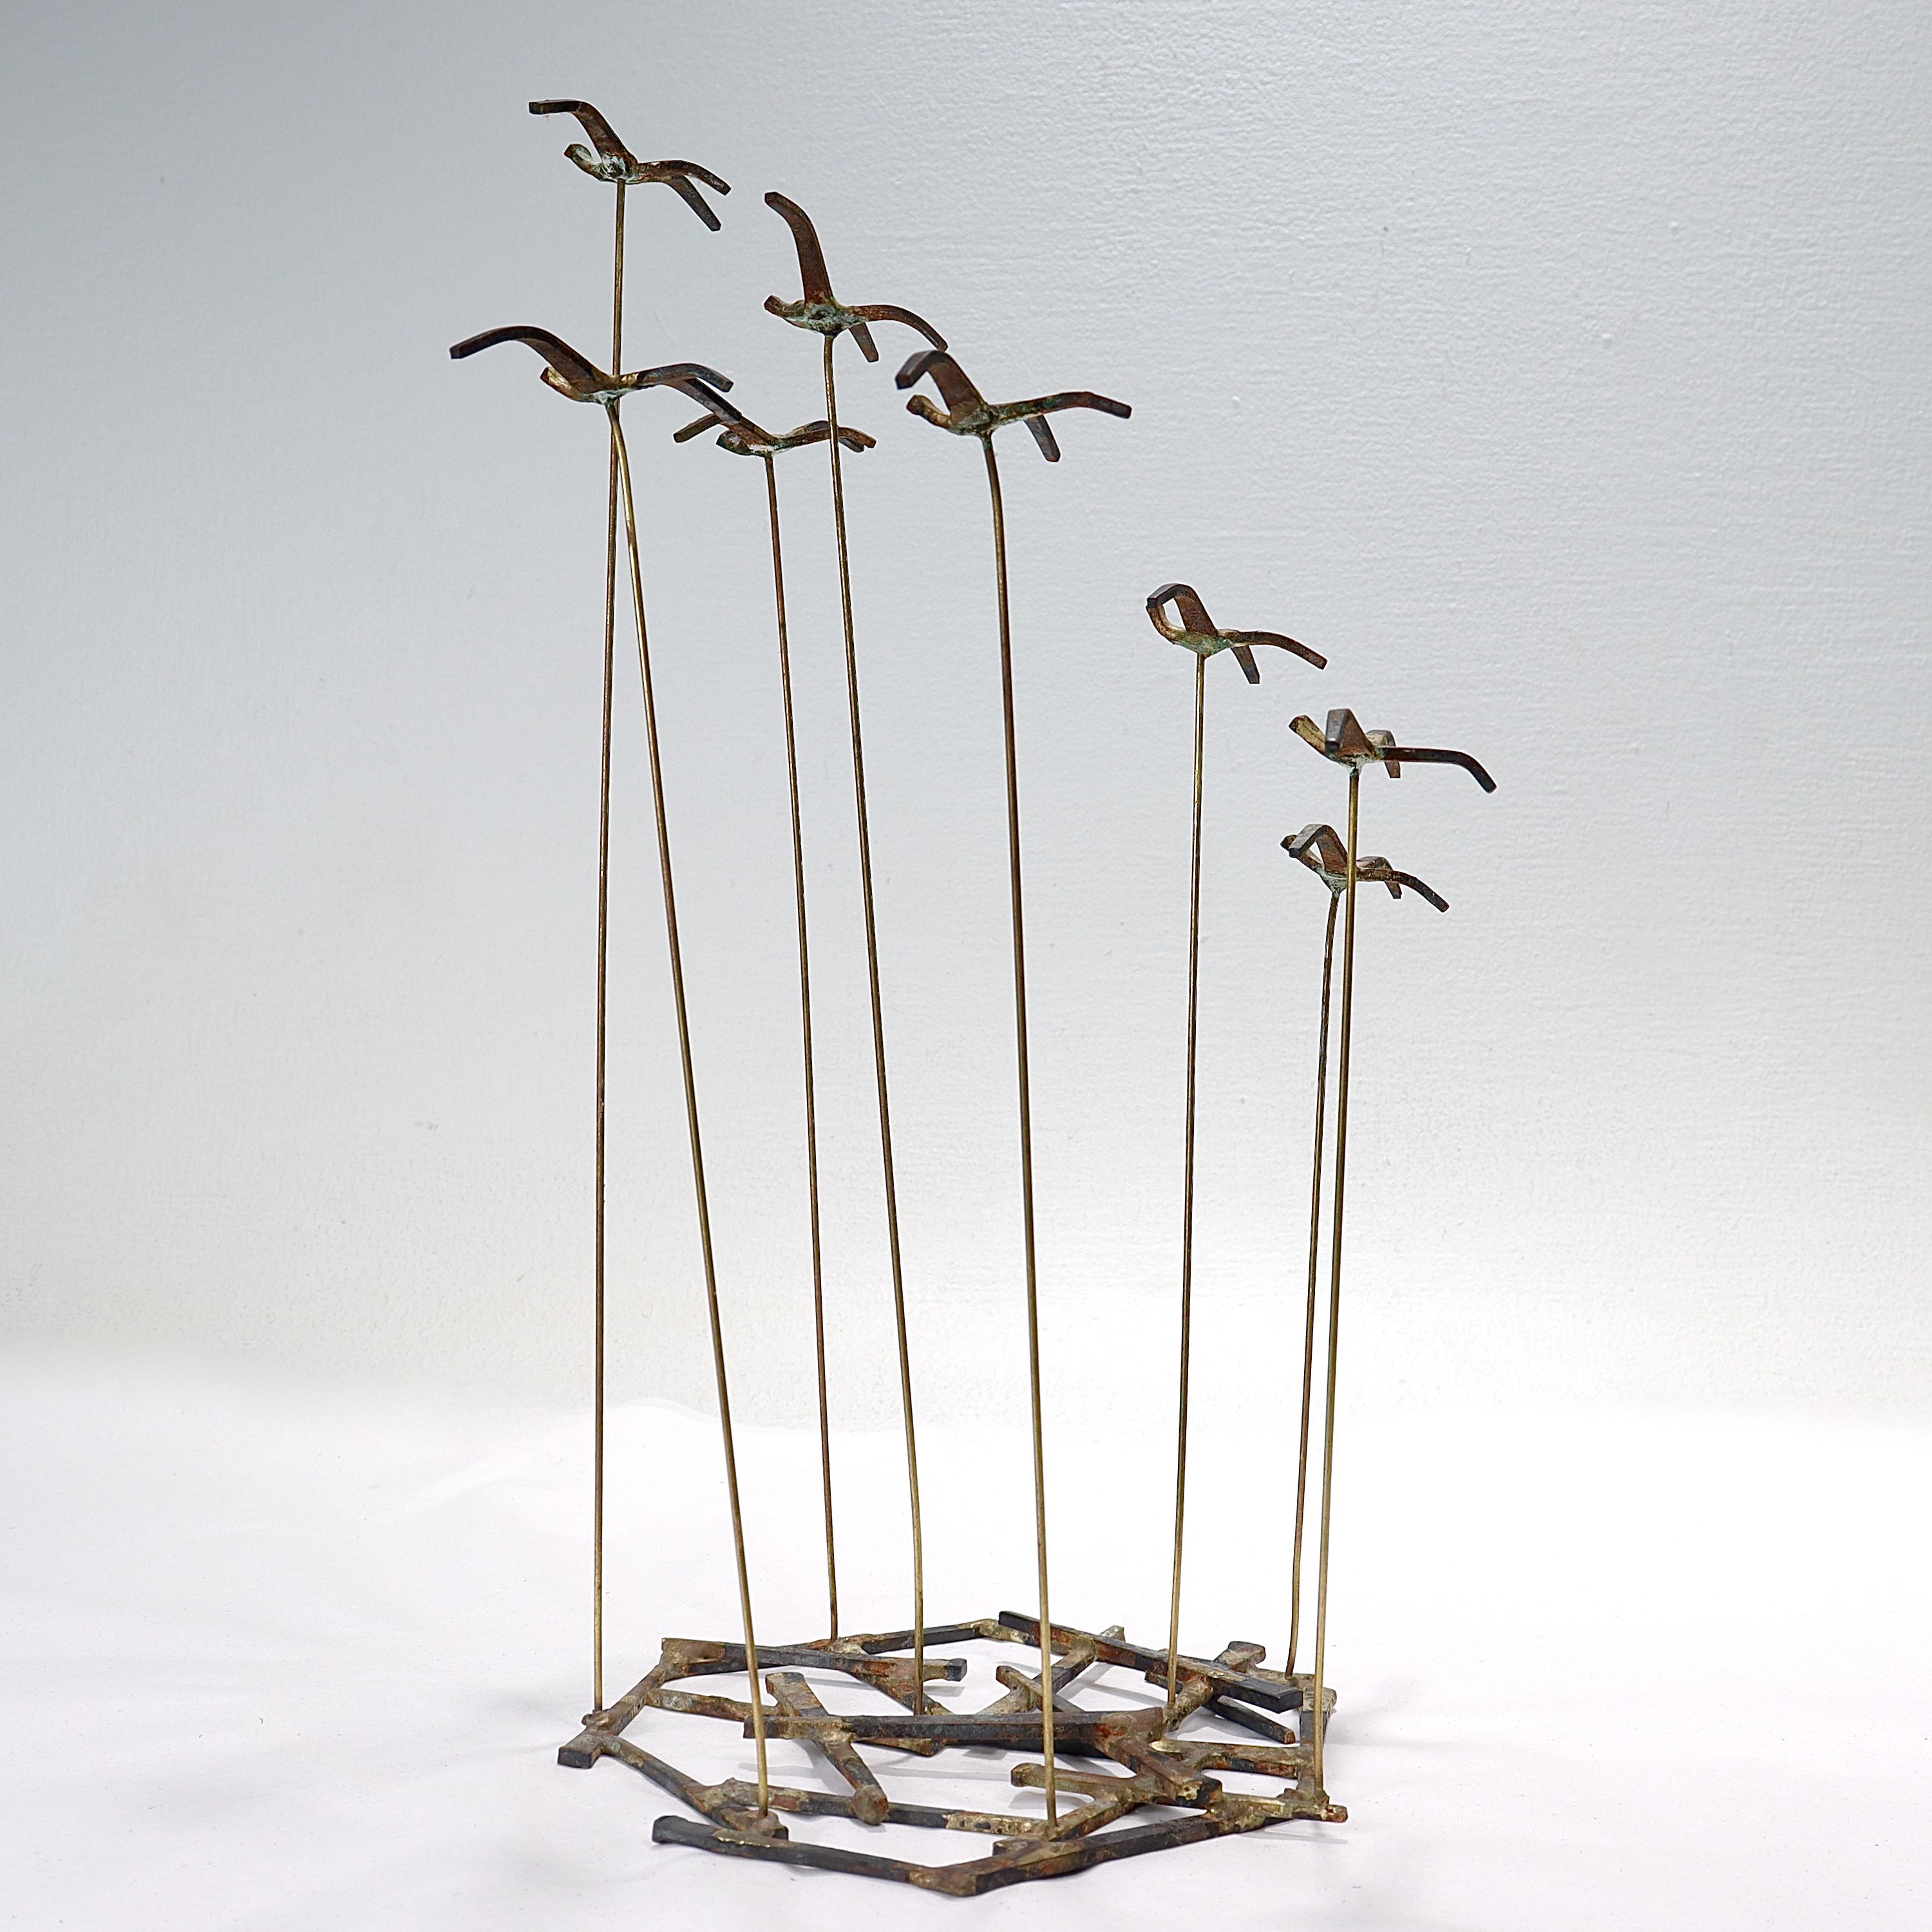 A fine Mid-Century Modern metal sculpture.

Depicting 8 birds in flight.

Constructed of cut square steel.

In the style of Curtis Jere.

Simply a great Mid-Century Modern sculpture!

Date:
Mid-20th Century

Overall Condition:
It is in overall good,